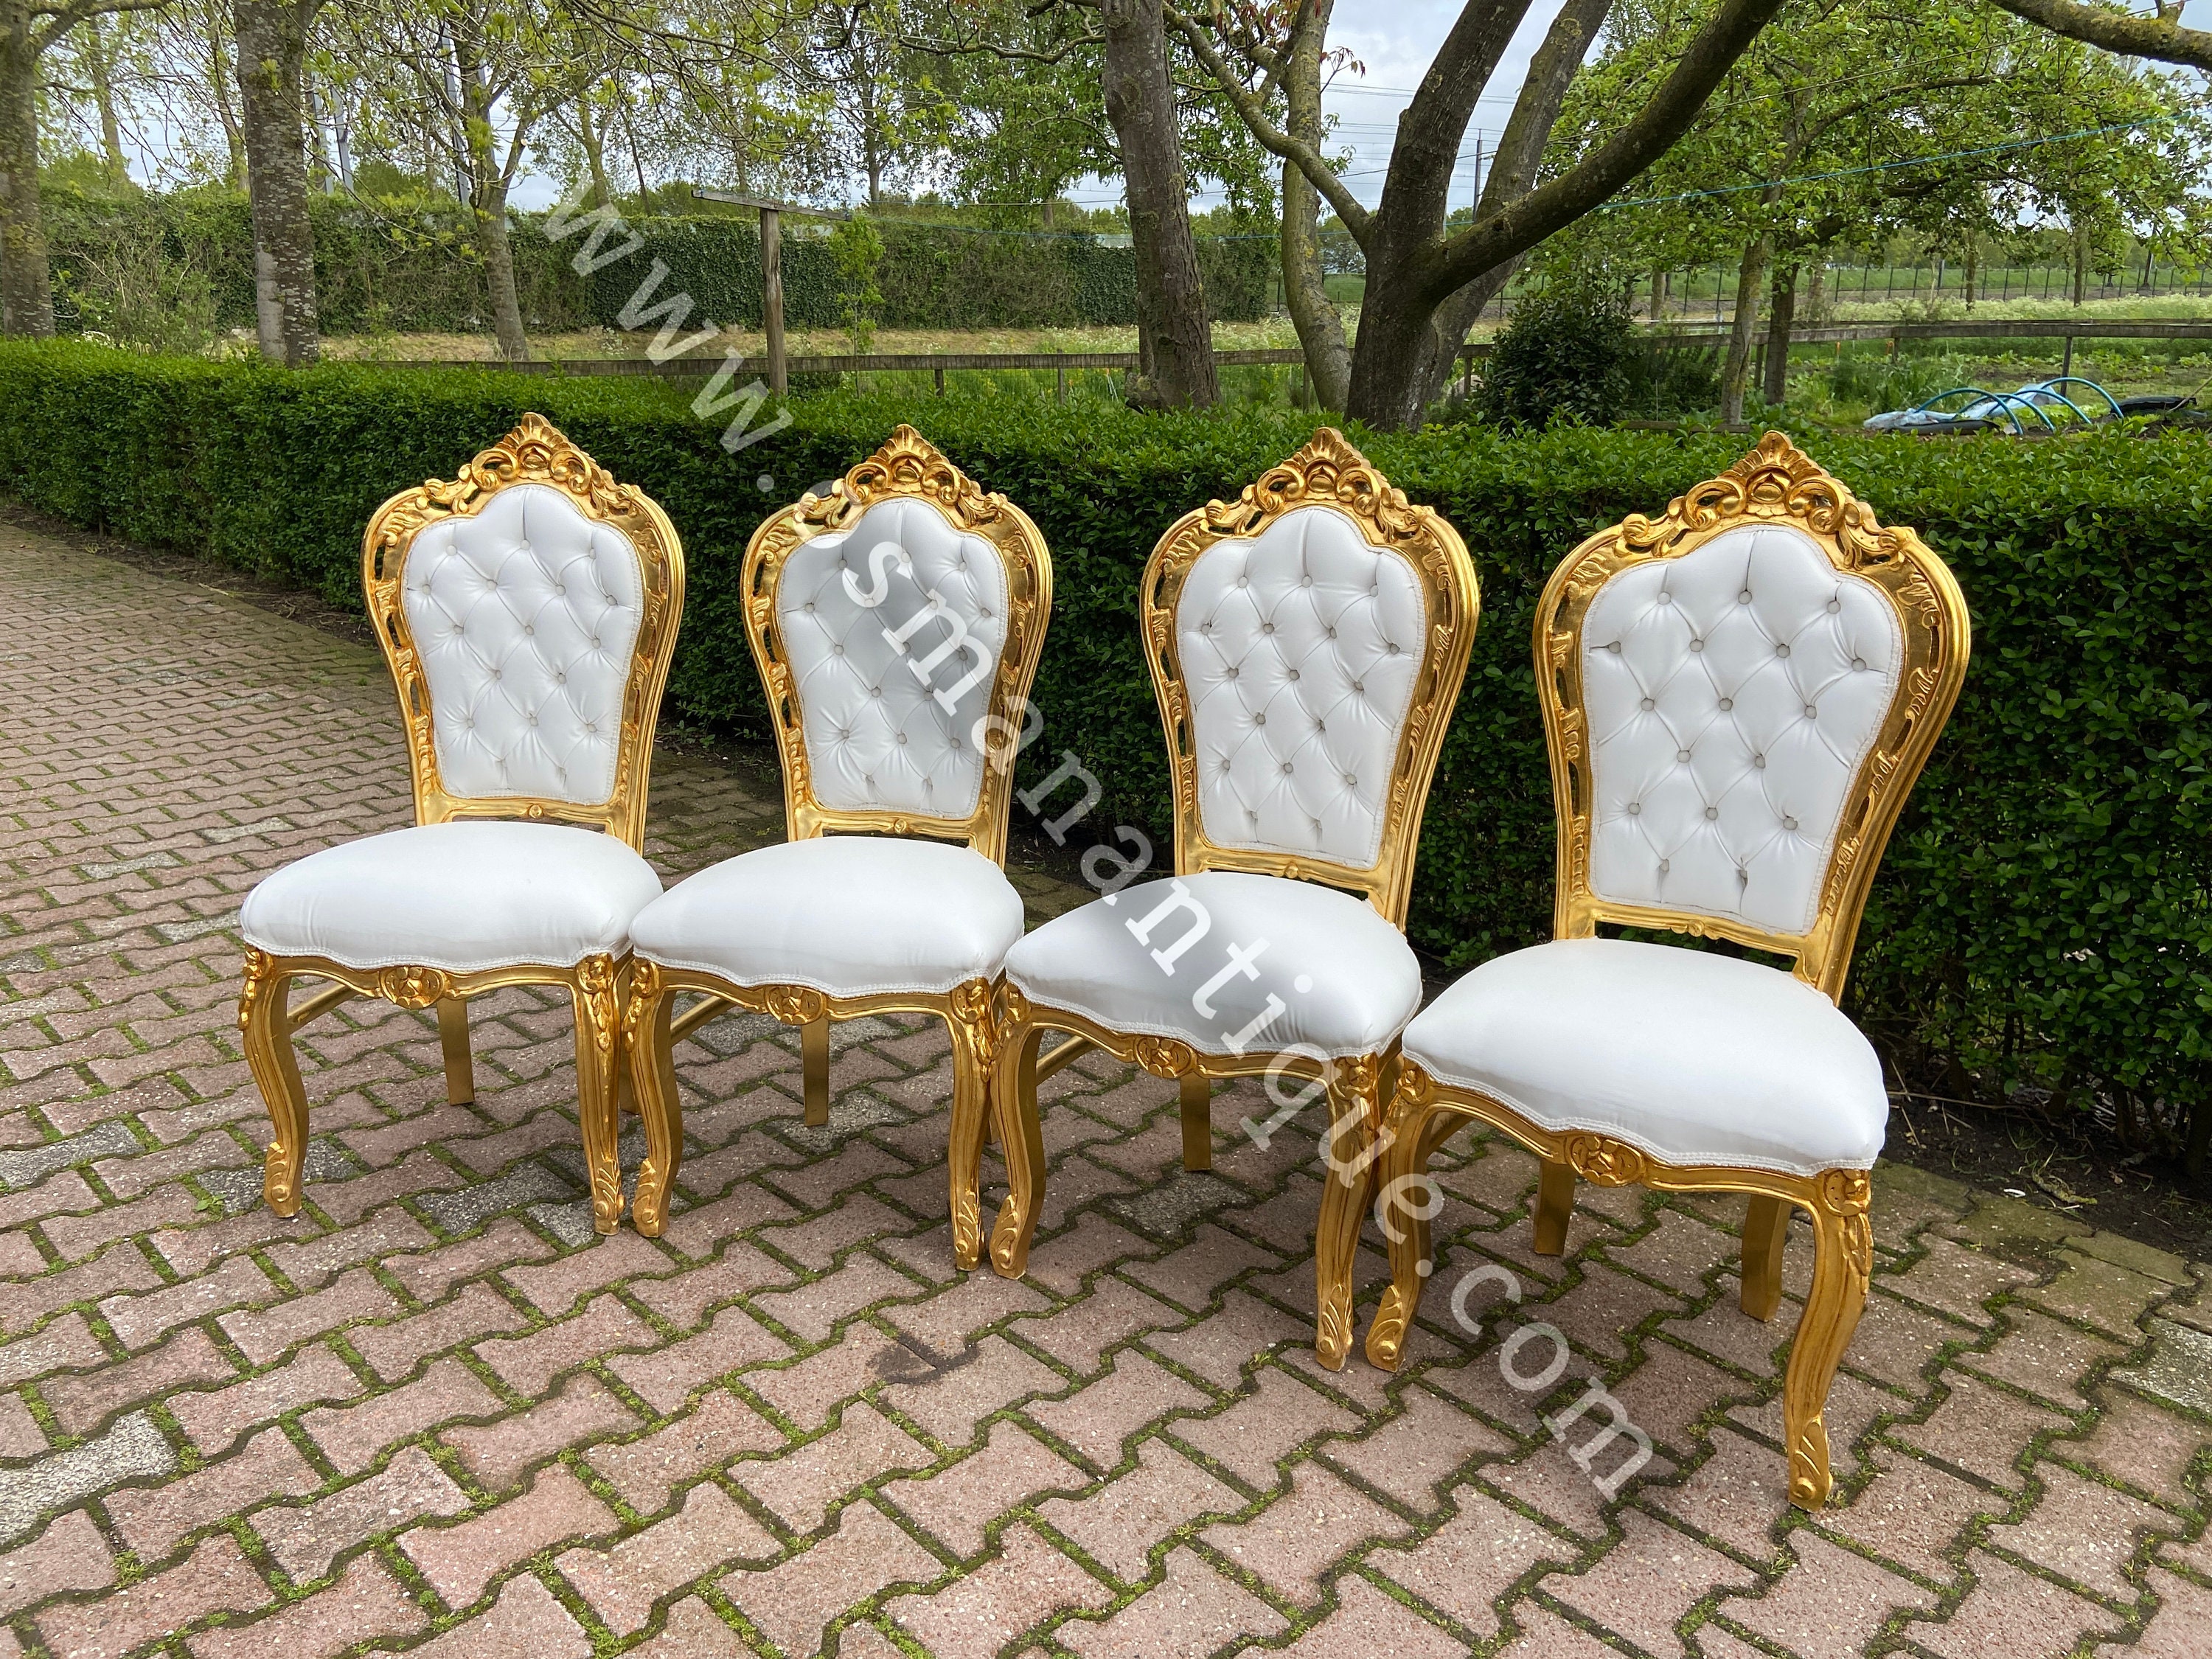 Fantastisch lunch katoen Italian Baroque Style Gold and White Dining Chairs Set of 4 - Etsy